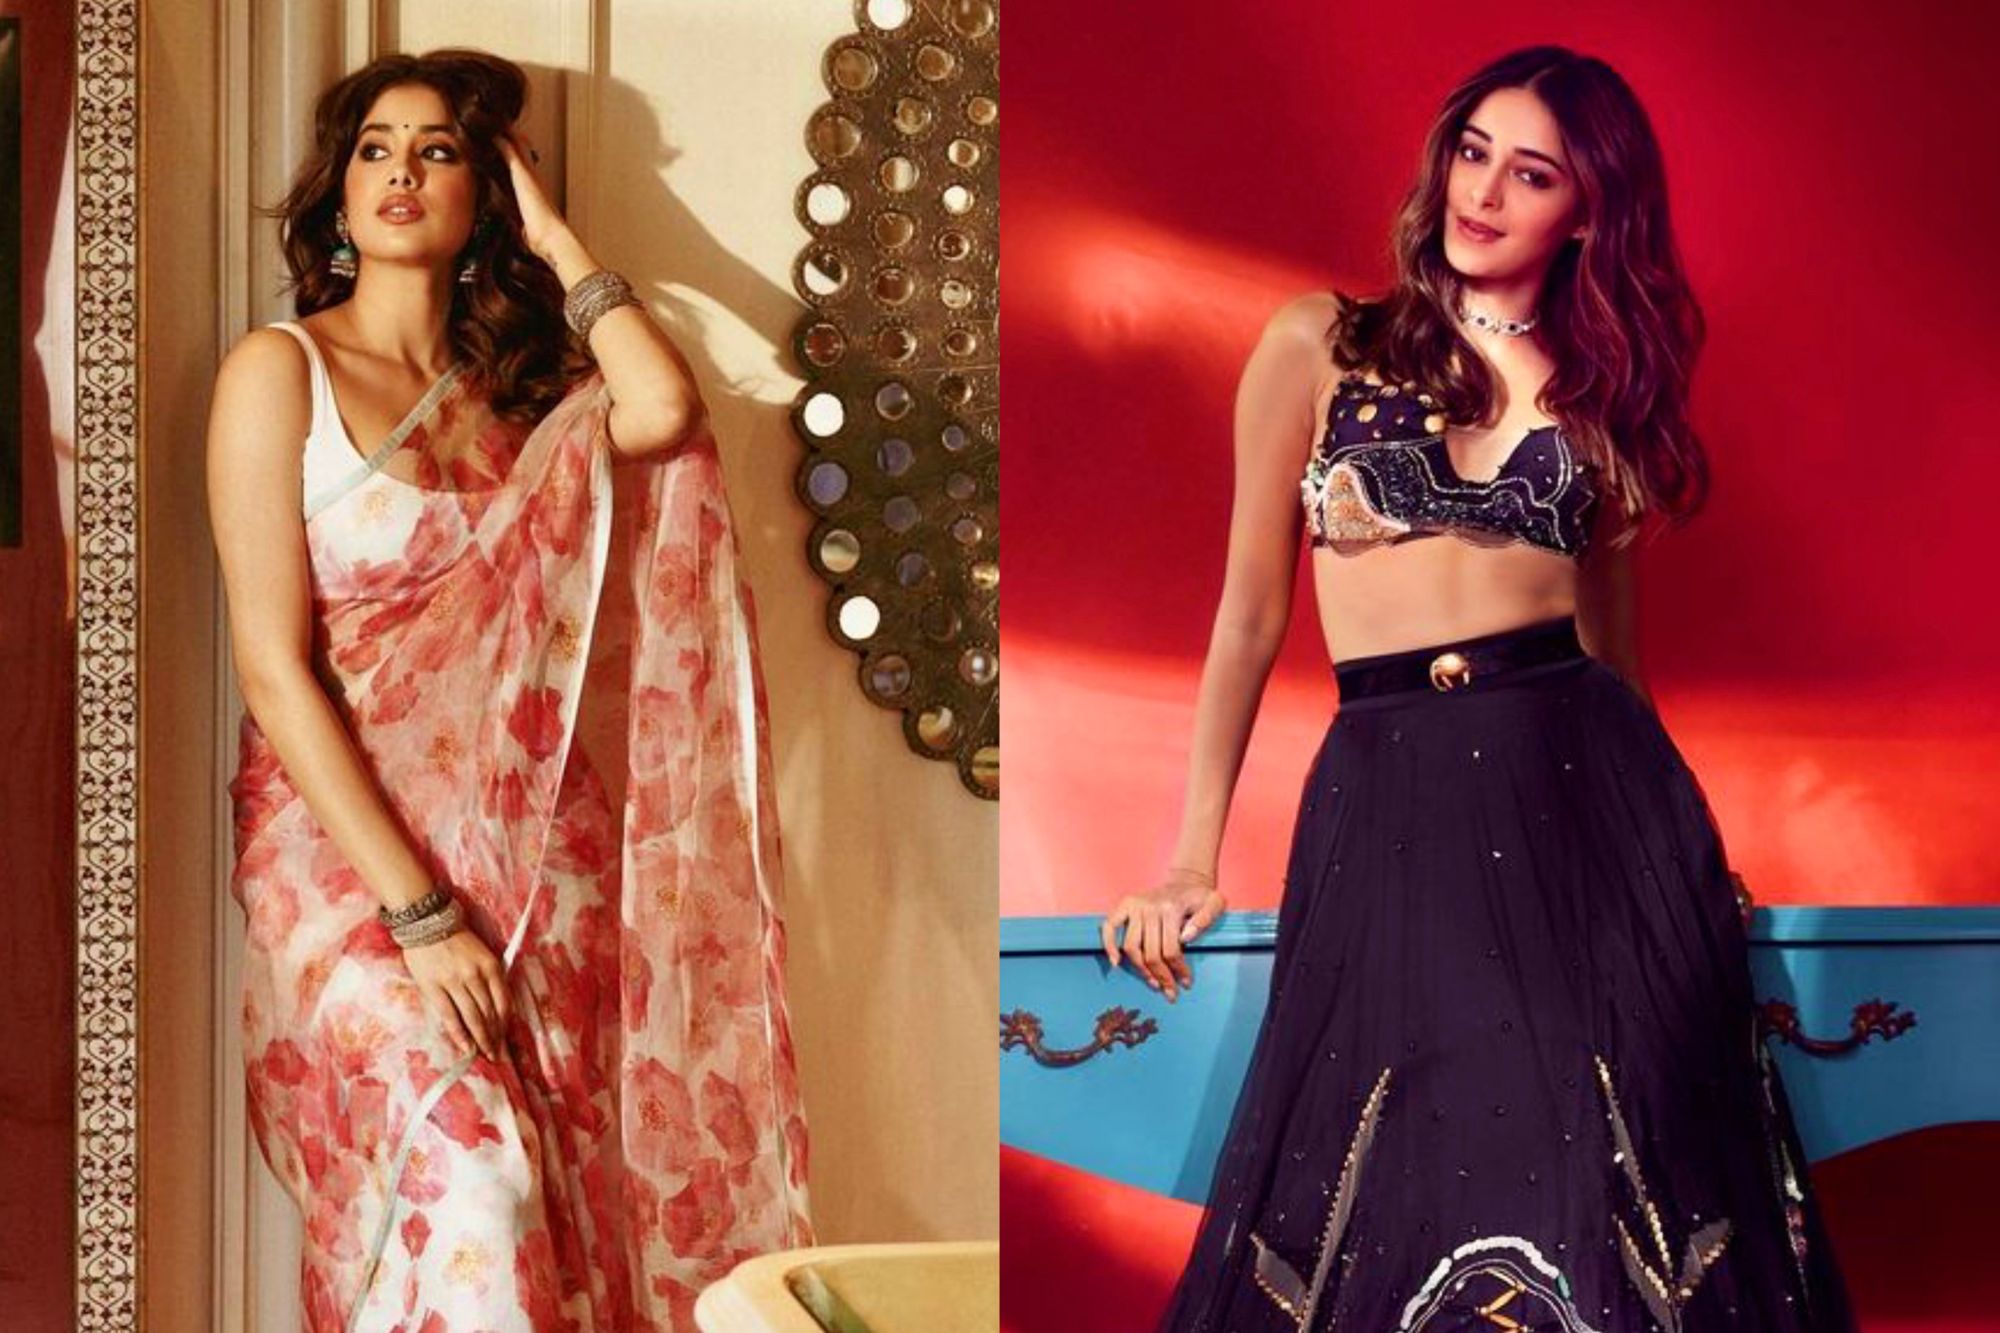 Ananya Panday And Janhvi Kapoor Ace The Traditional Vibe In Their These Outfits